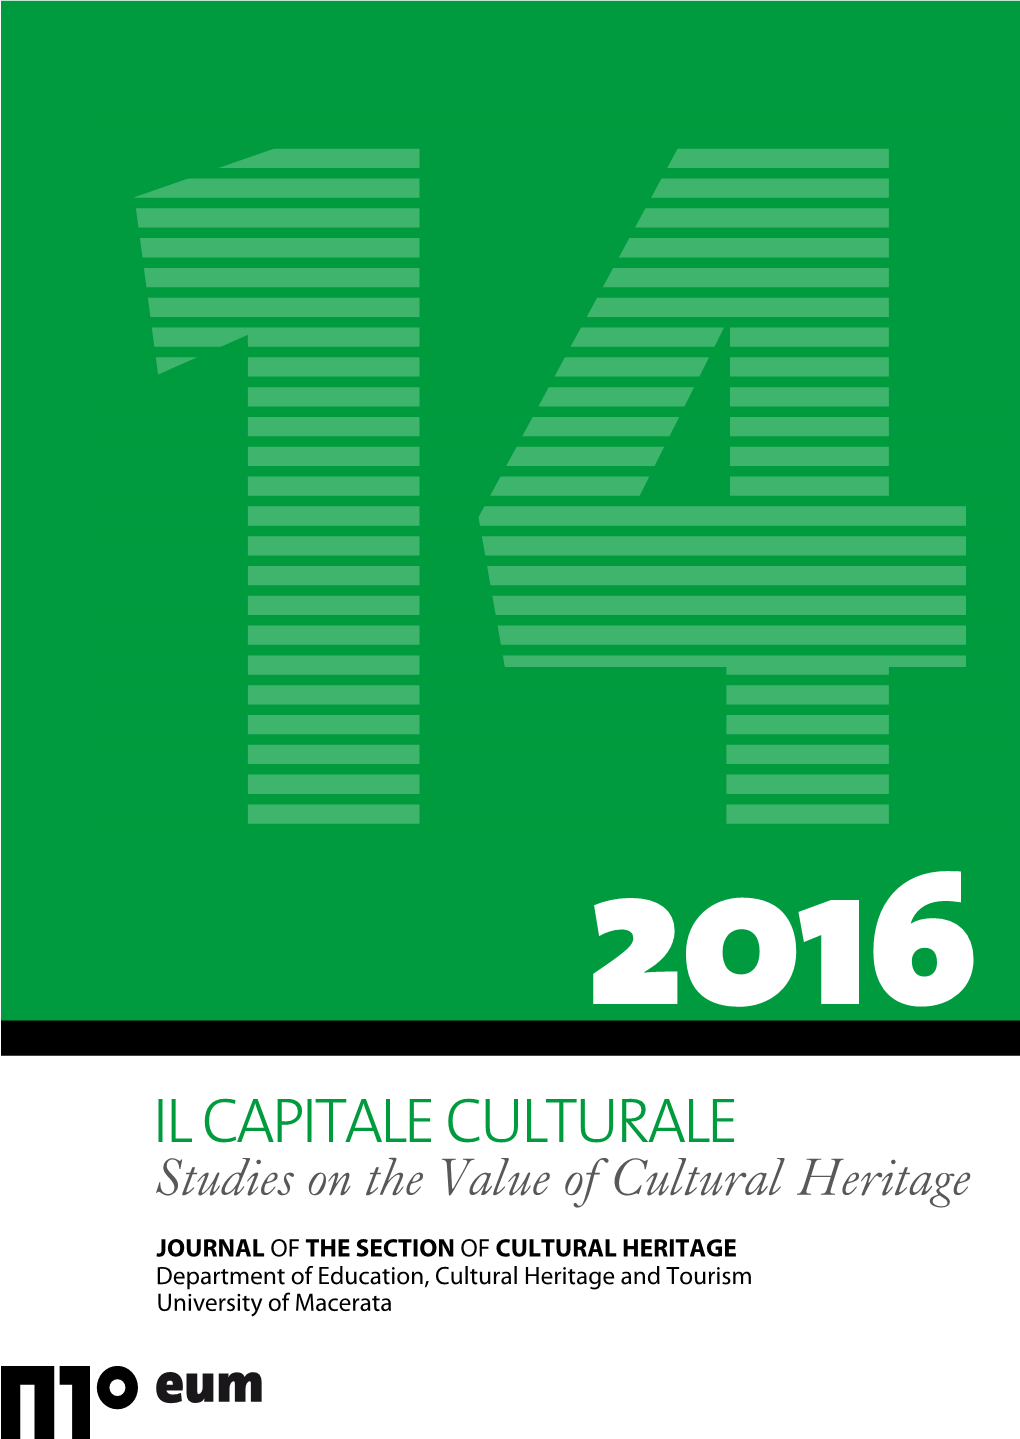 Studies on the Value of Cultural Heritage